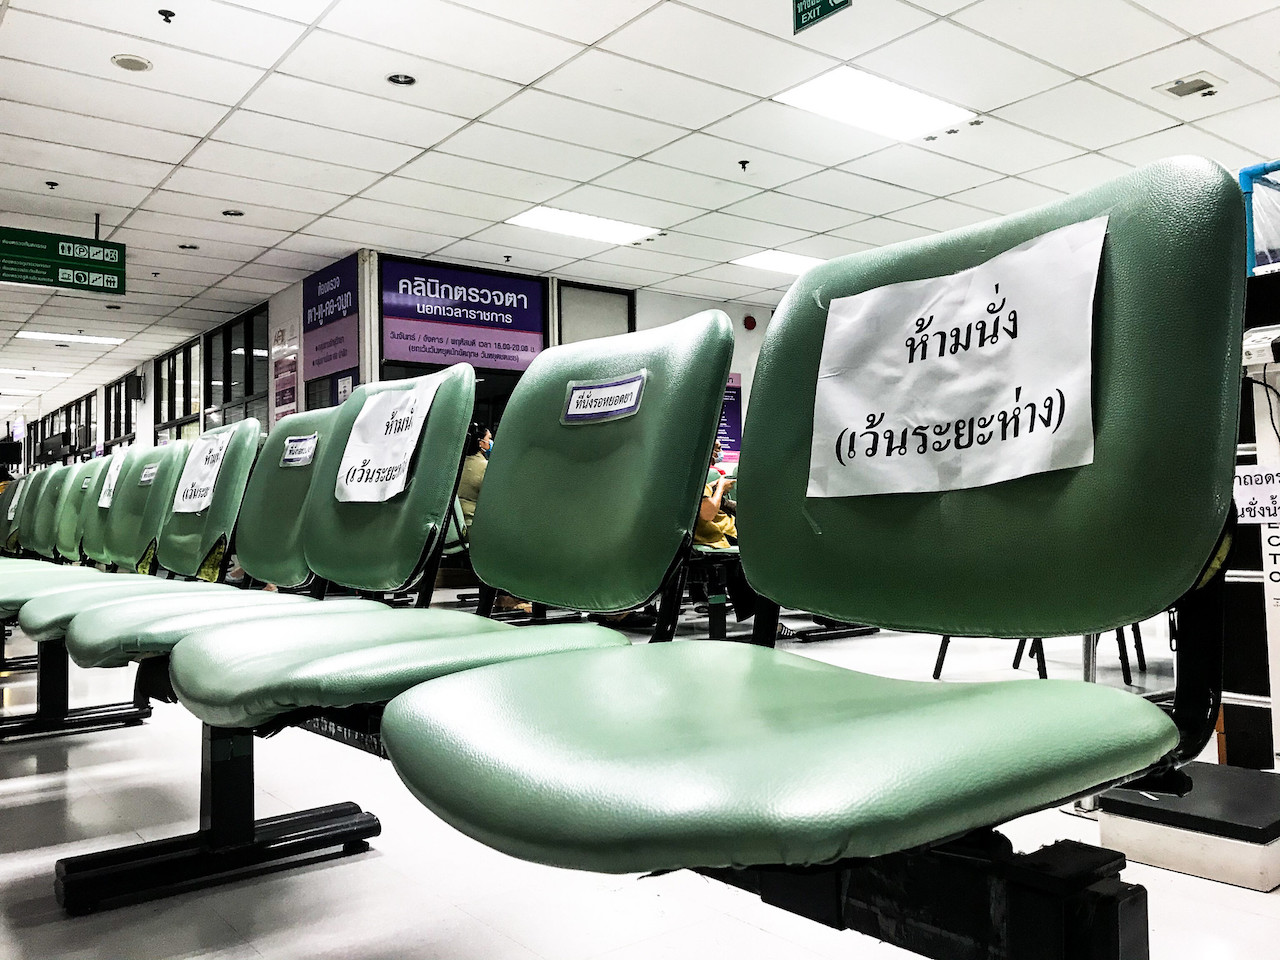 Seating arrangements during COVID-19 outbreak in Thailand